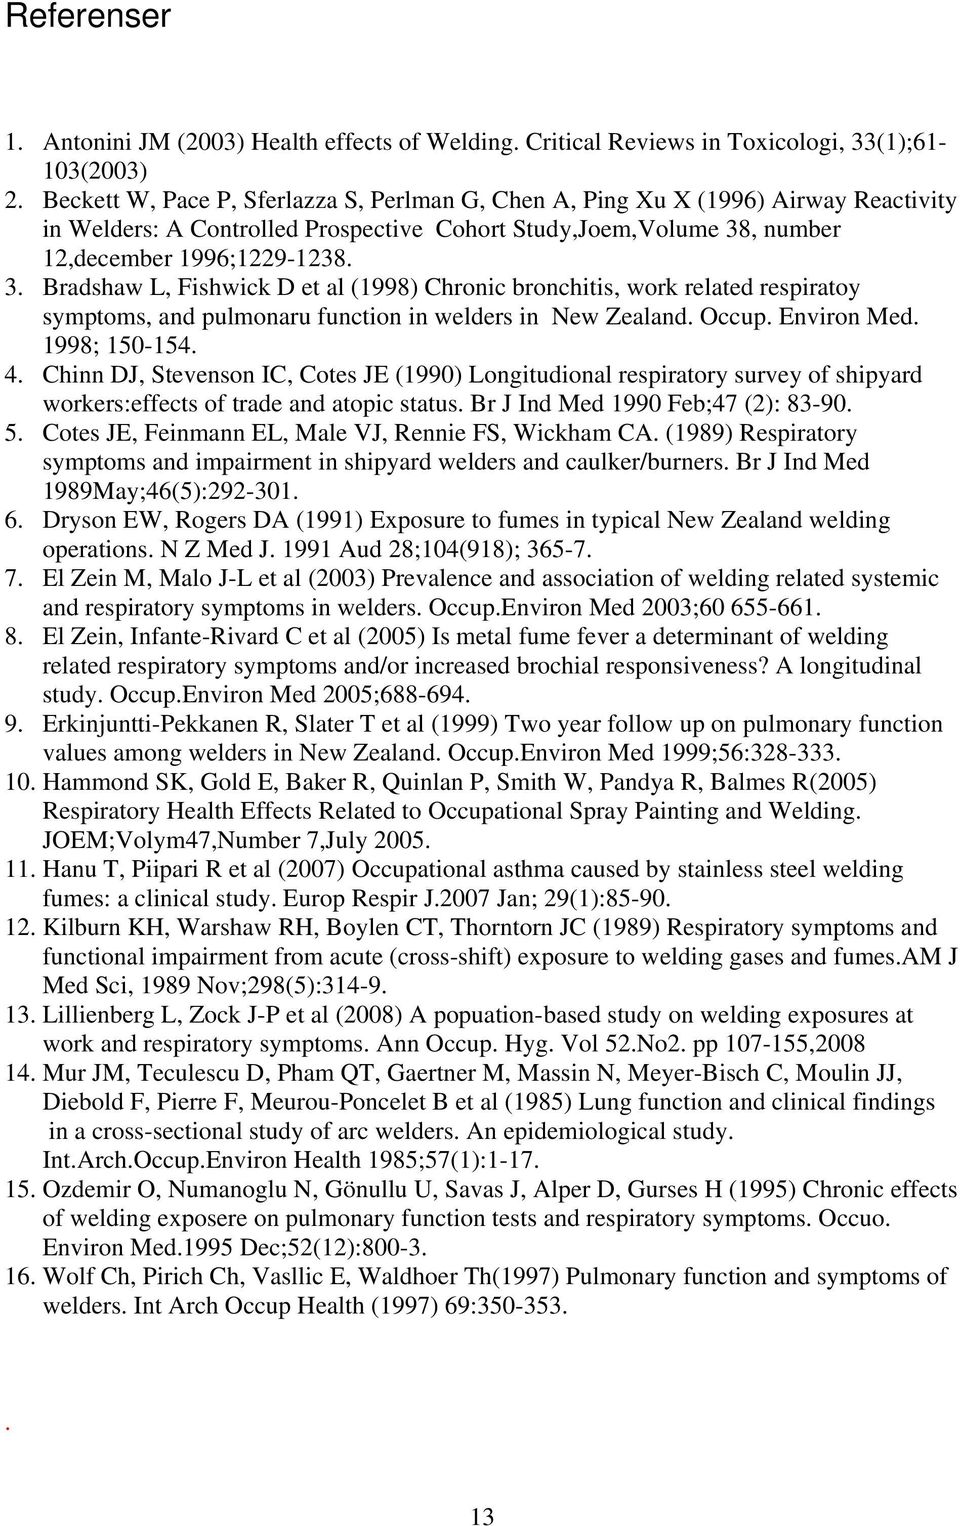 , number 12,december 1996;1229-1238. 3. Bradshaw L, Fishwick D et al (1998) Chronic bronchitis, work related respiratoy symptoms, and pulmonaru function in welders in New Zealand. Occup. Environ Med.